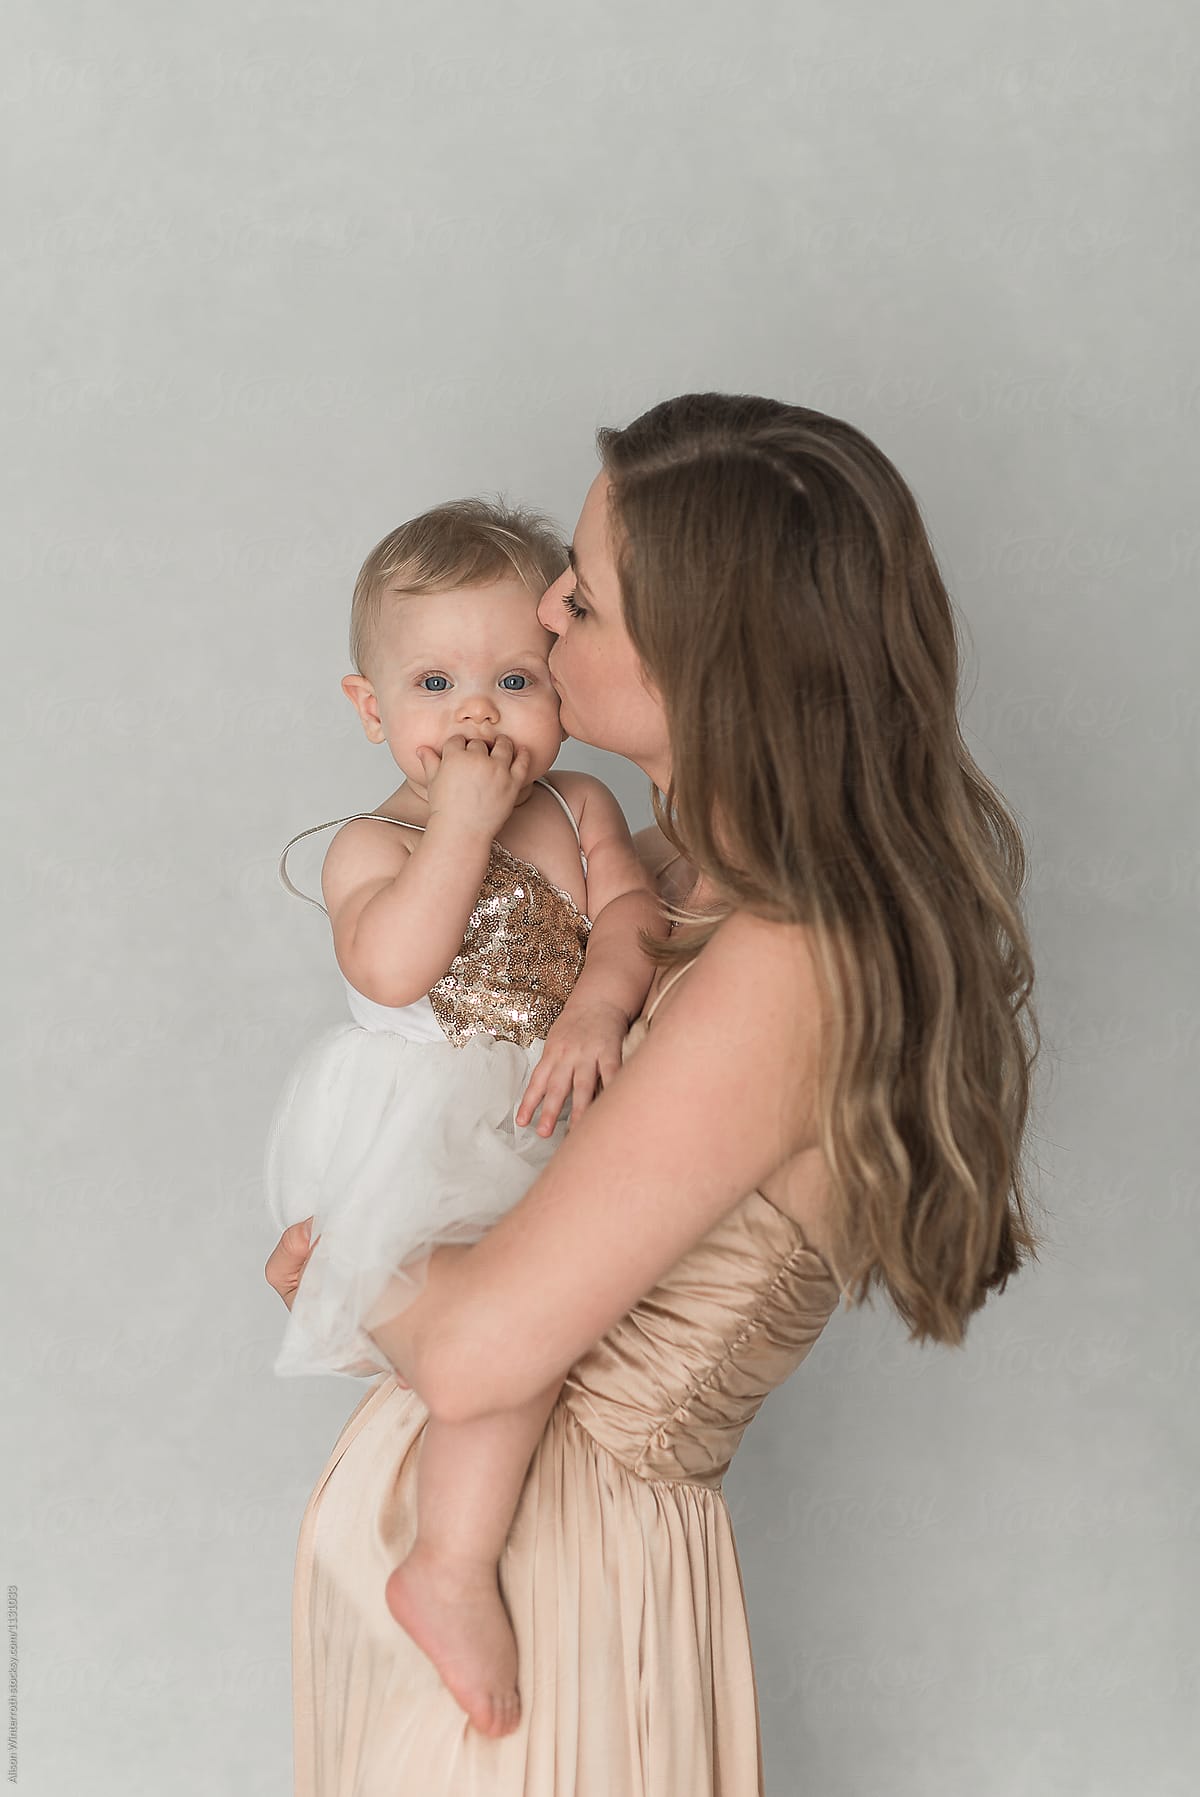 Mother Kissing Her Daughter By Stocksy Contributor Alison Winterroth